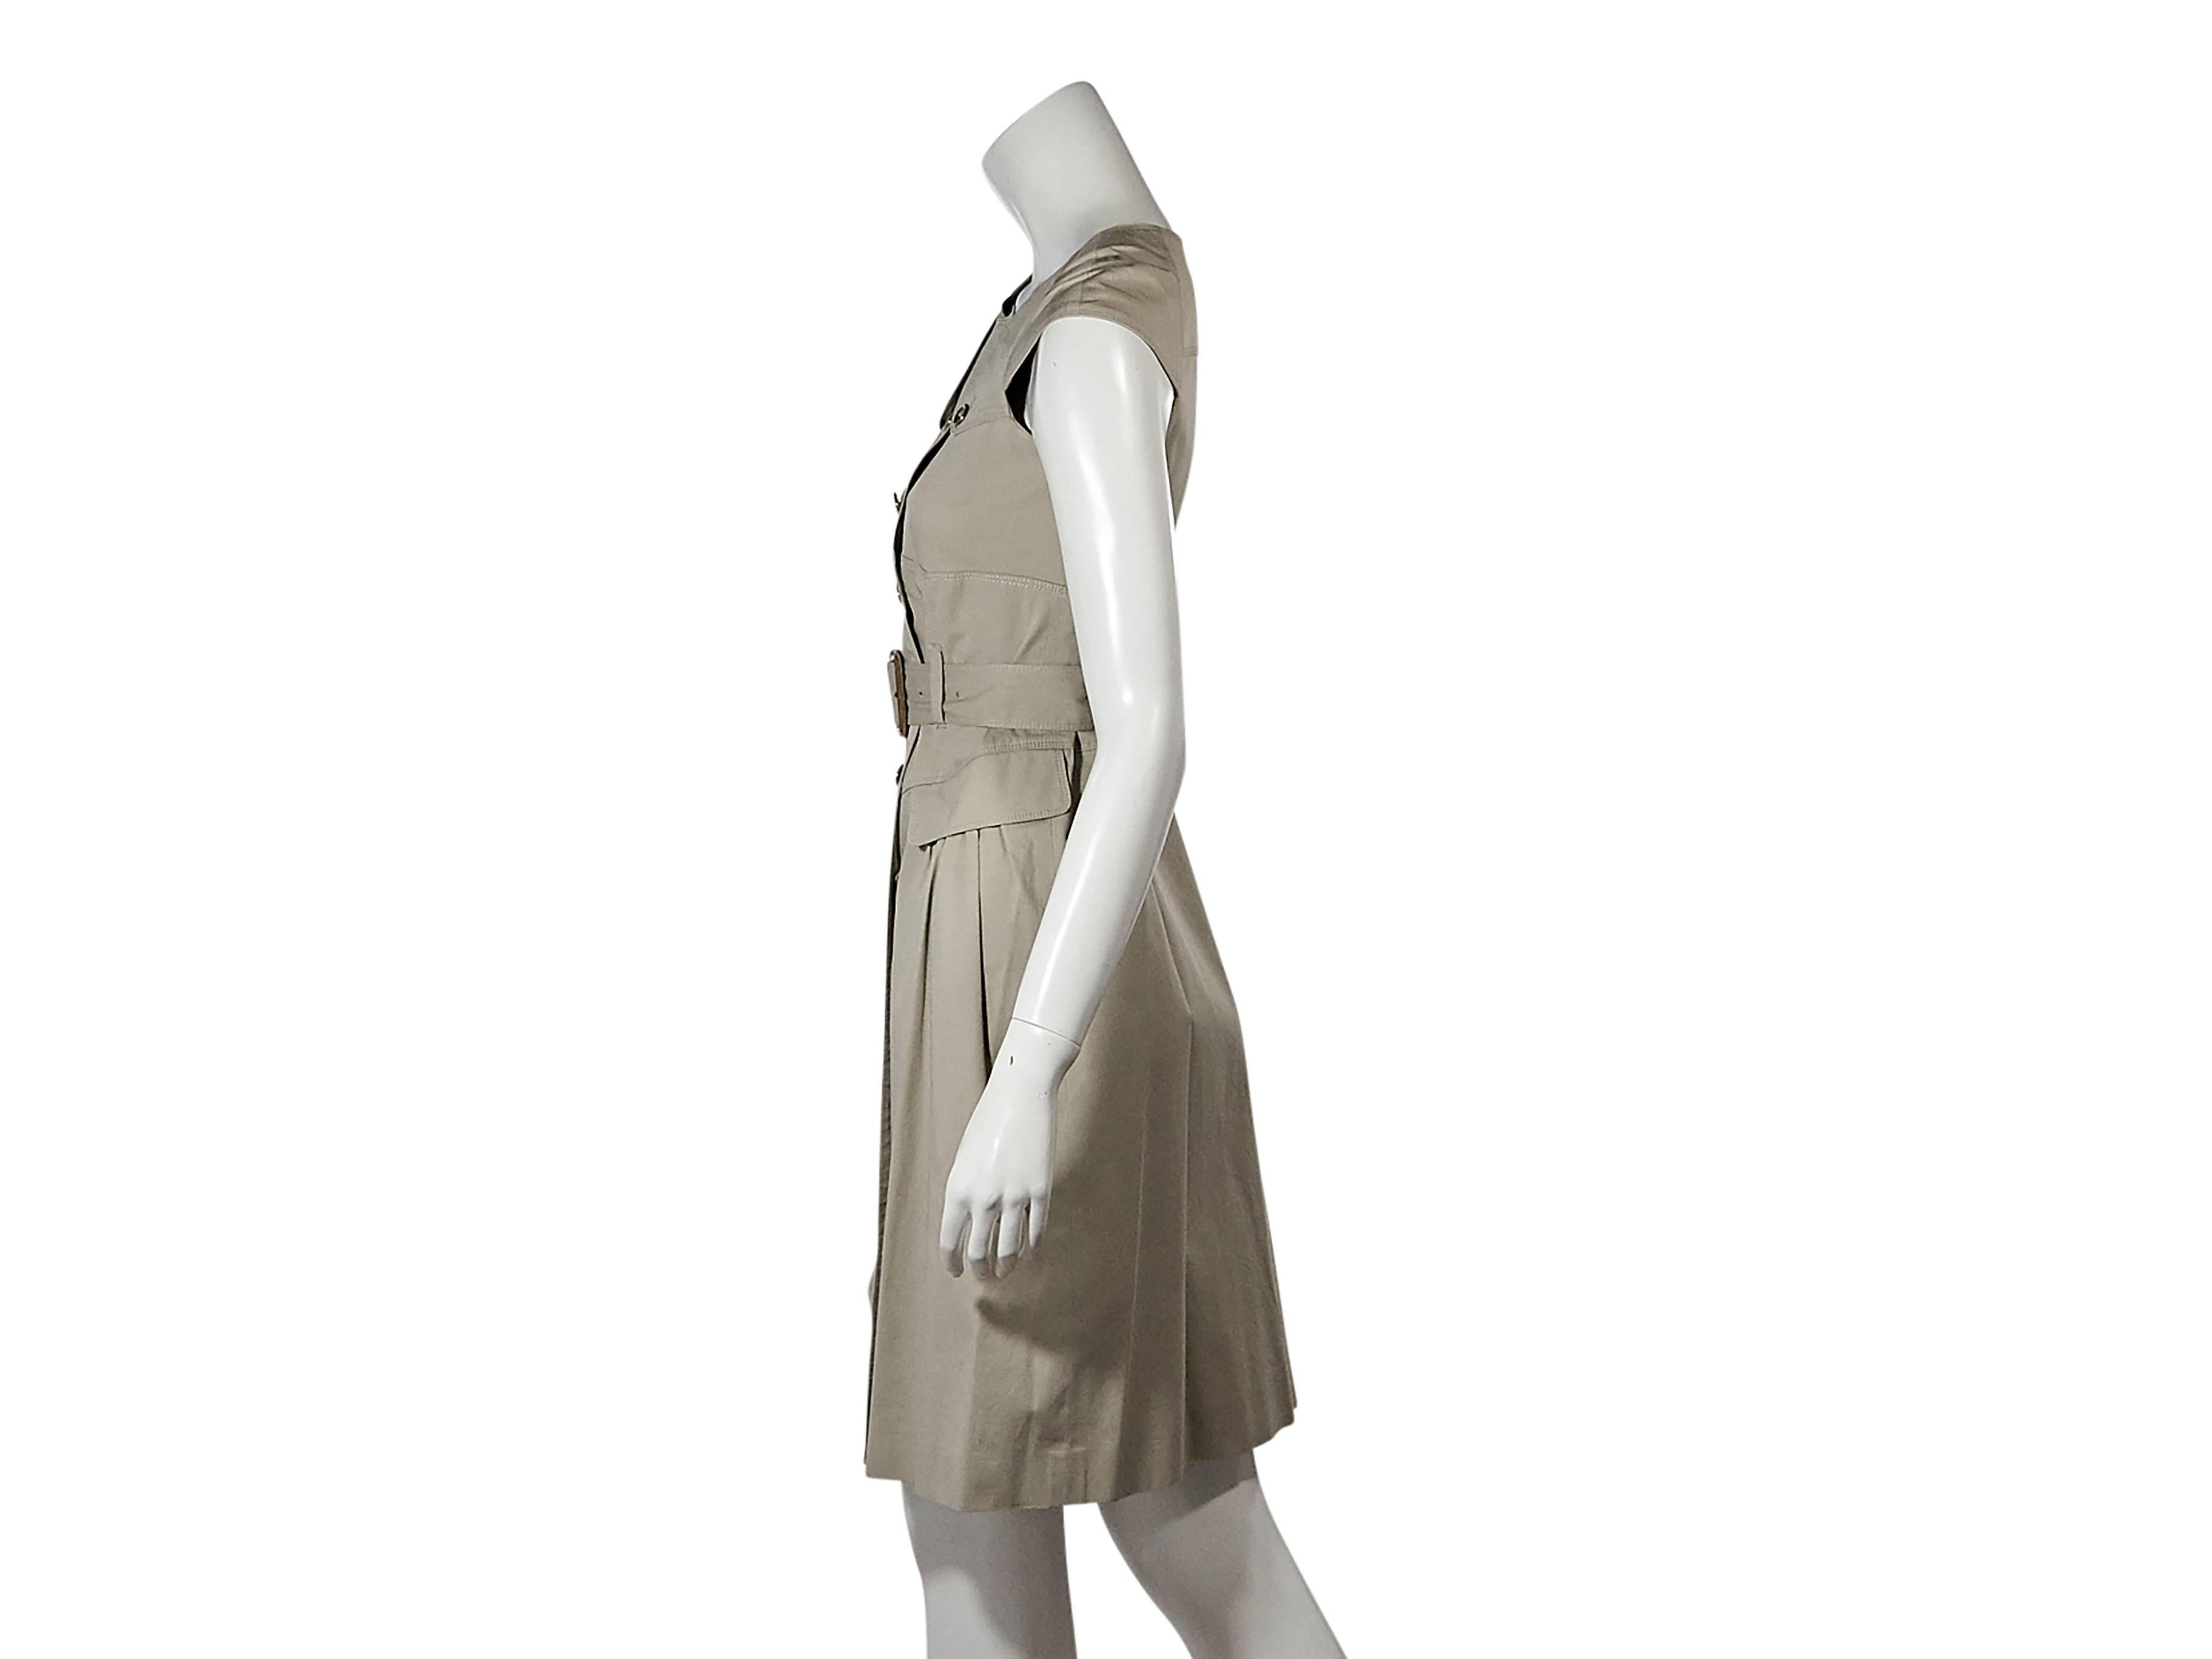 Product details:  Tan trench-style dress by Burberry London.  Jewelneck.  Cap sleeves.  Double-breasted button front.  Adjustable belted waist.  Waist flap pockets. Size 4
Condition: Pre-owned. Very good.

Est. Retail $ 989.00
